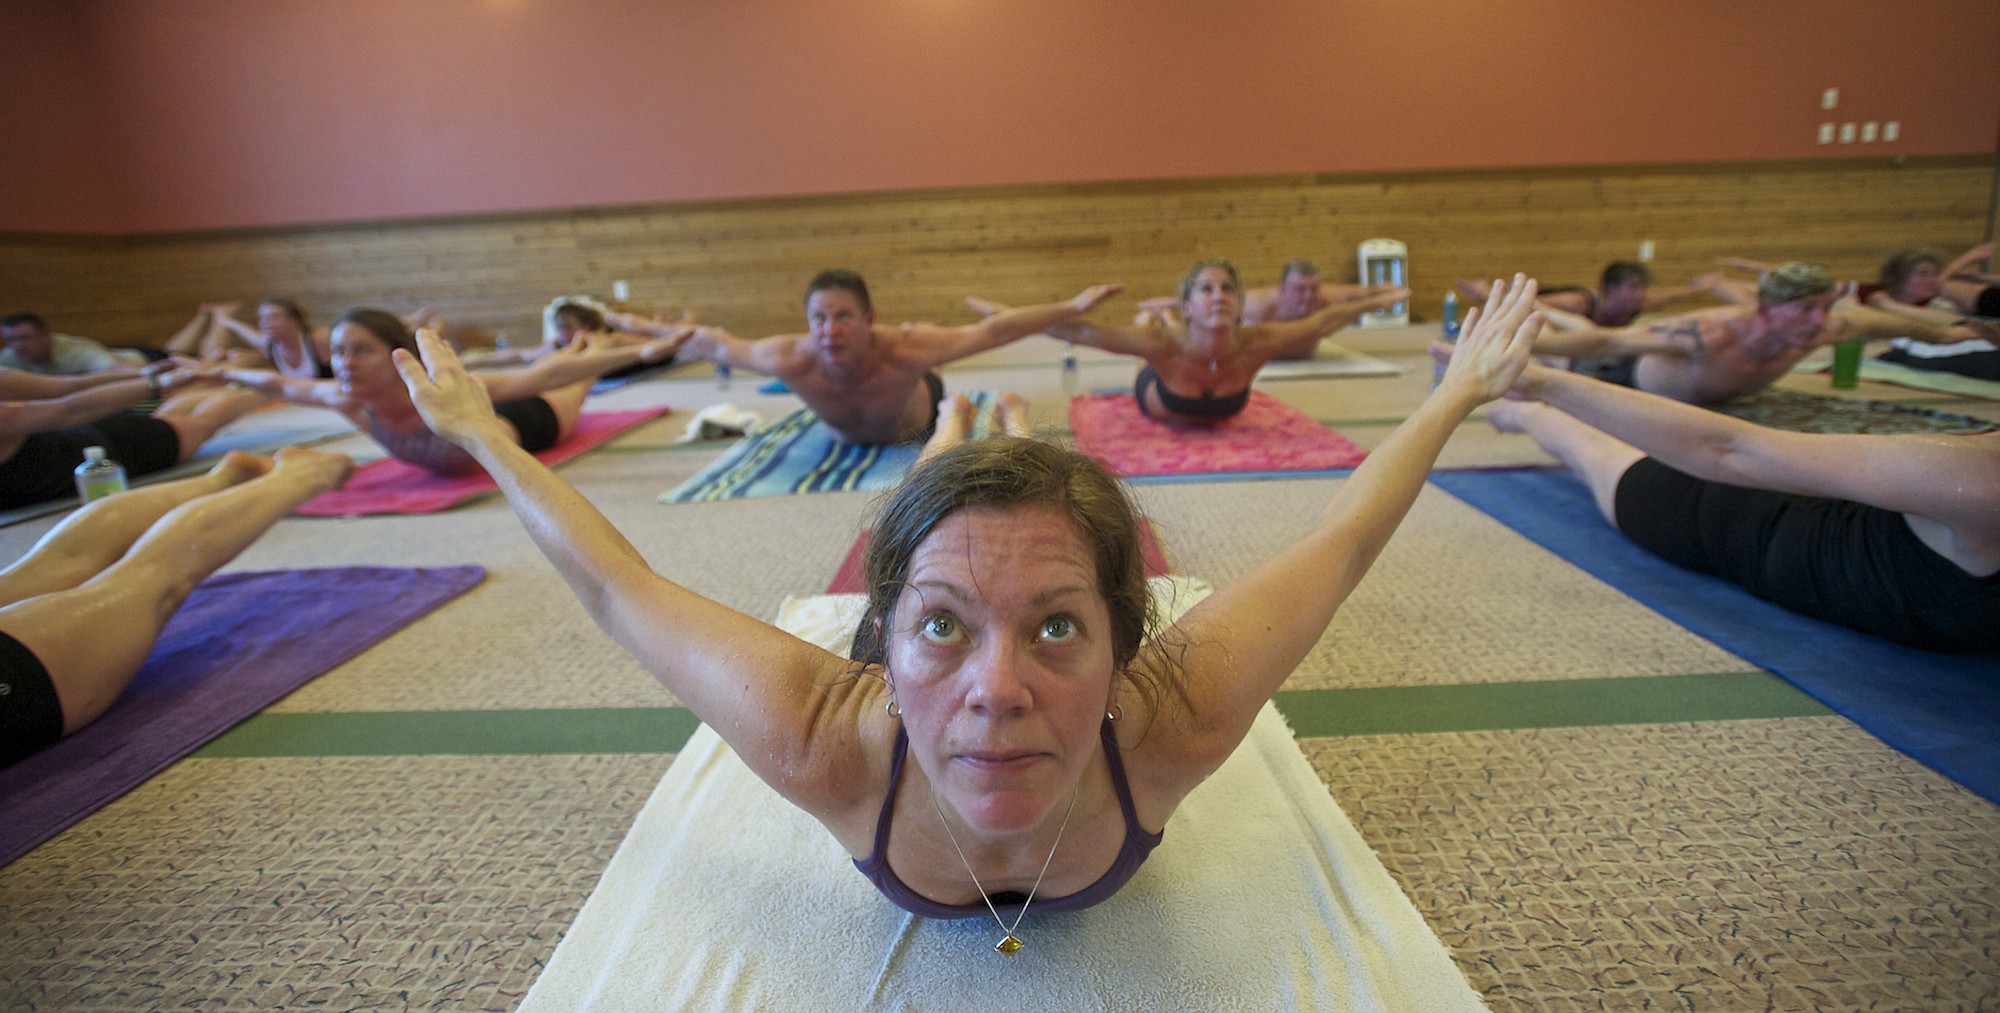 Danelle Berardinelli and other students look ready to fly during a class at Bikram Hot Yoga Vancouver.